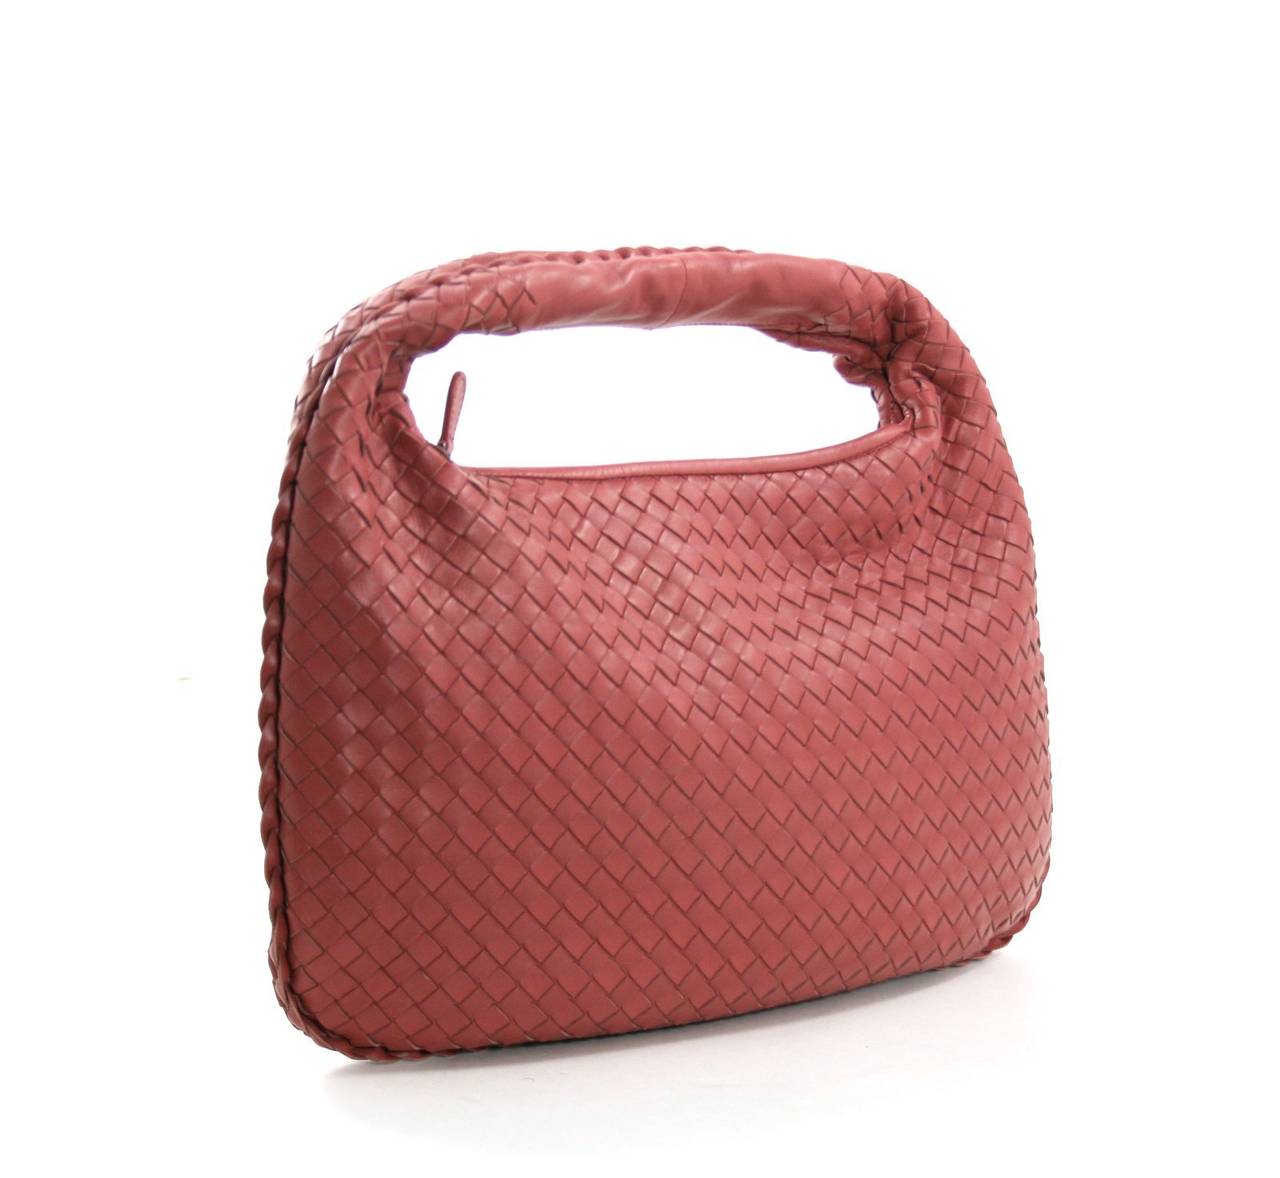 Bottega Veneta Rose Leather Medium Veneta Bag- Brand New, never before carried.  2013 color ROSE (pinky red); gunmetal hardware; intrecciato leather.
Zippered top, cocoa suede interior.  Made in Italy.
BV mirror and dust bag included.  Retail